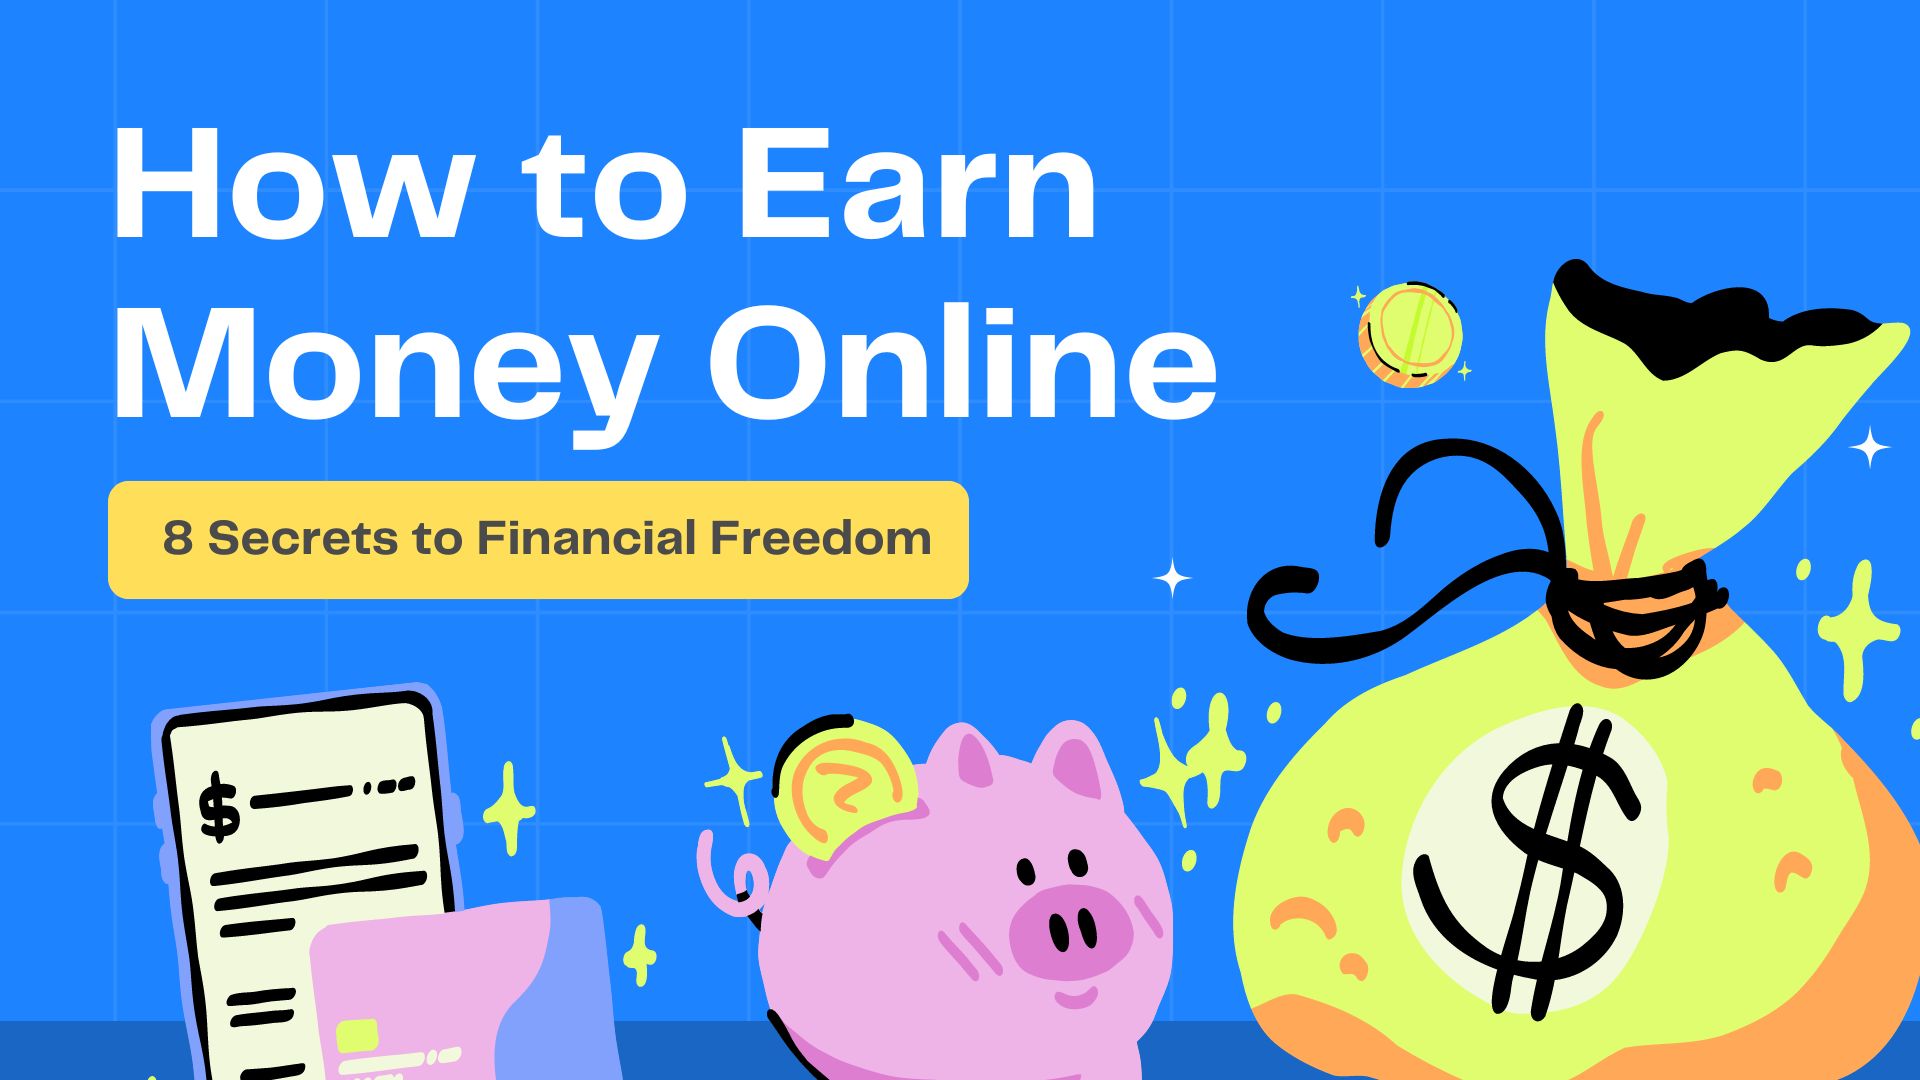 The image is a graphic related to how to earn money online.